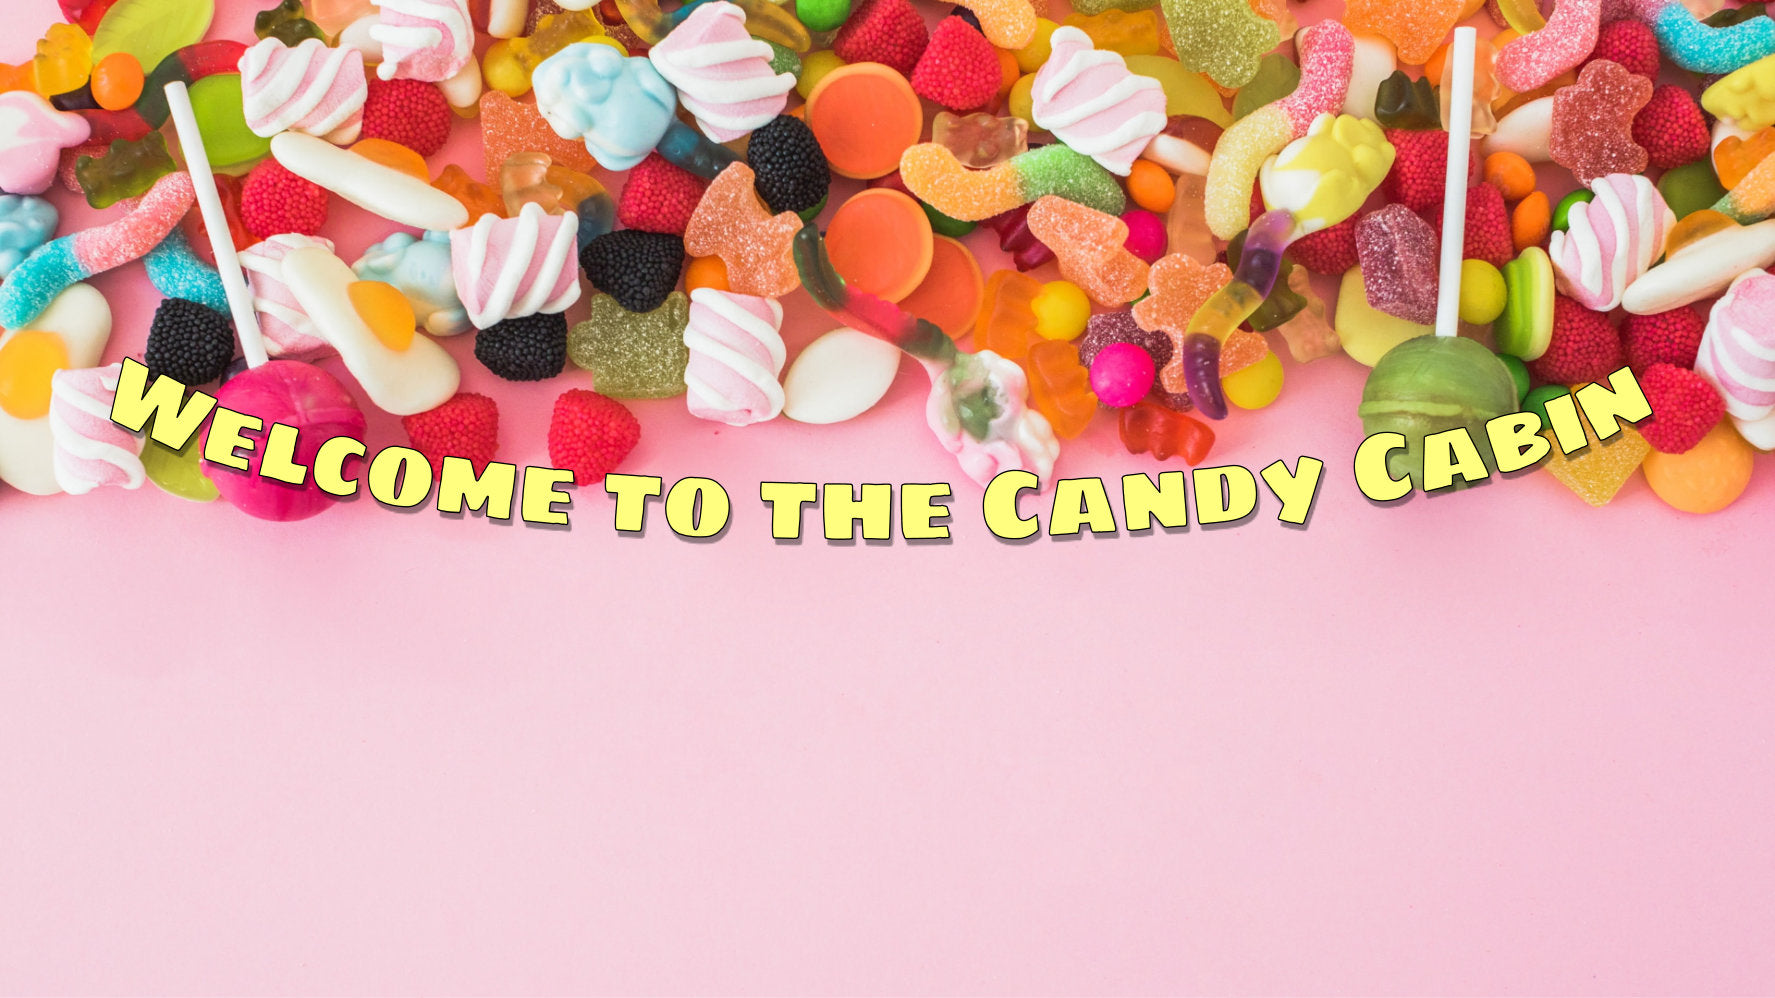 Candy Cabin Ltd Traditional Online Sweet Shop Candy Store